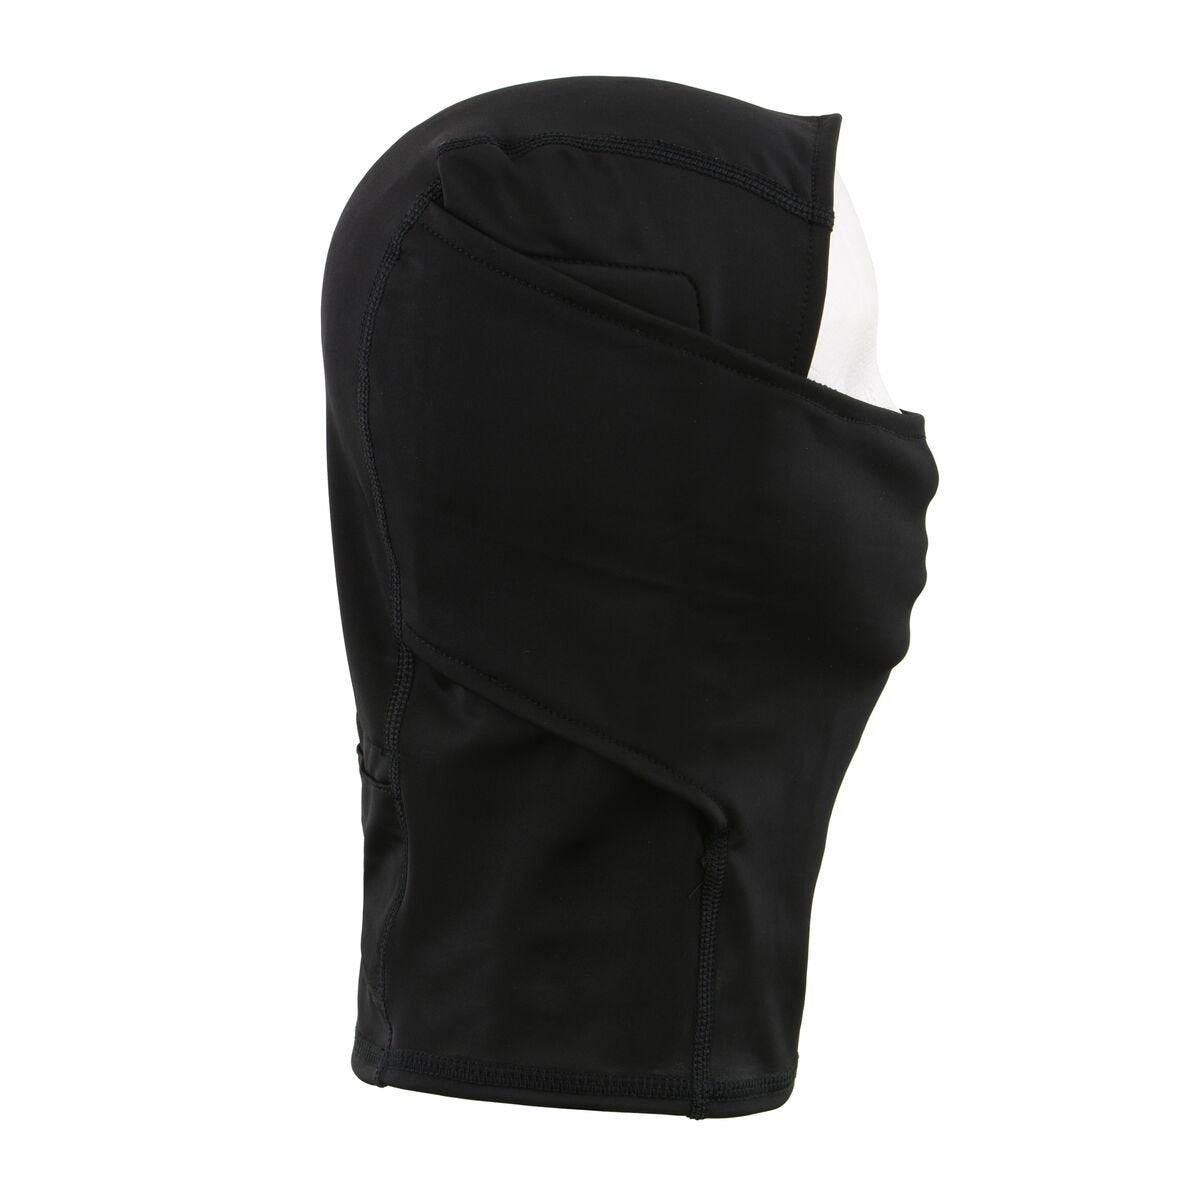 NexGen Heat MP7922FMSET Heated Breathable Balaclava for Skiing, Motorcycle ‚Äì Heated Winter Face Mask w/ Battery Pack